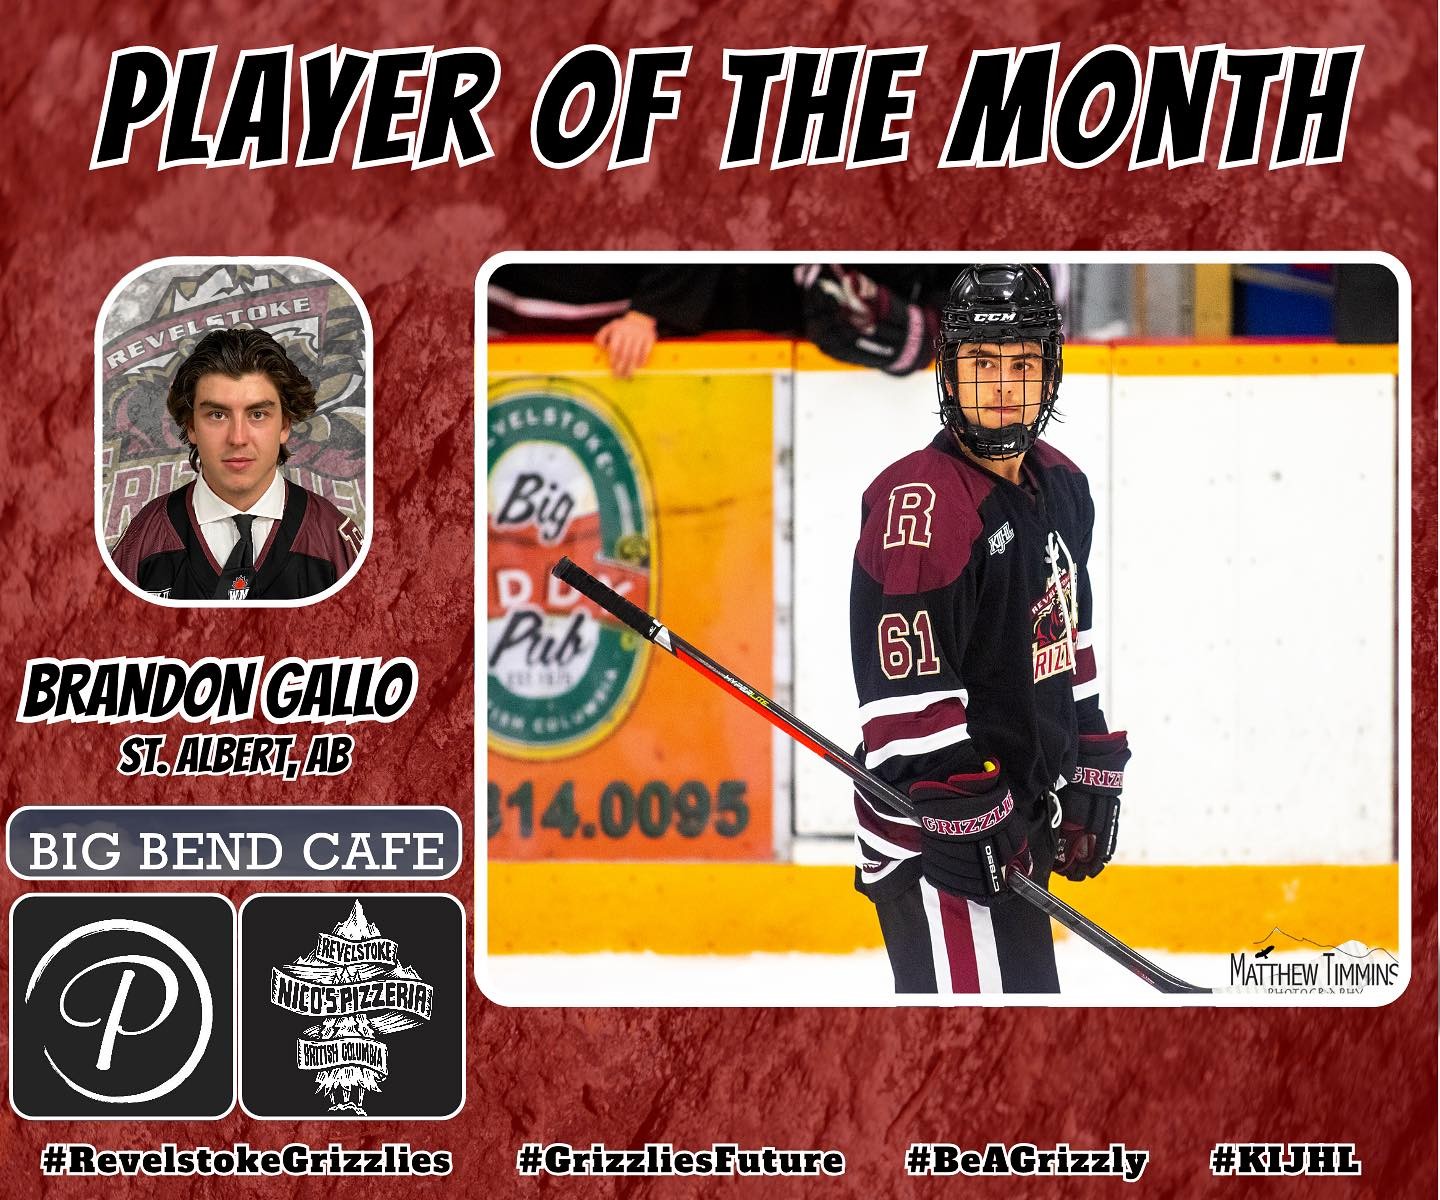 Congratulations Brandon Gallo for being our December Player of the Month. 

Our Player of the month is supported by @pureimagehair and @bigbendcafe and @nicospizzeria_revelstoke

Thank you for your support. 

📸( @timminsphotos )

#RevelstokeGrizzlies #BeAGrizzly #GrizzliesFuture #KIJHL #PlayerOfTheMonth